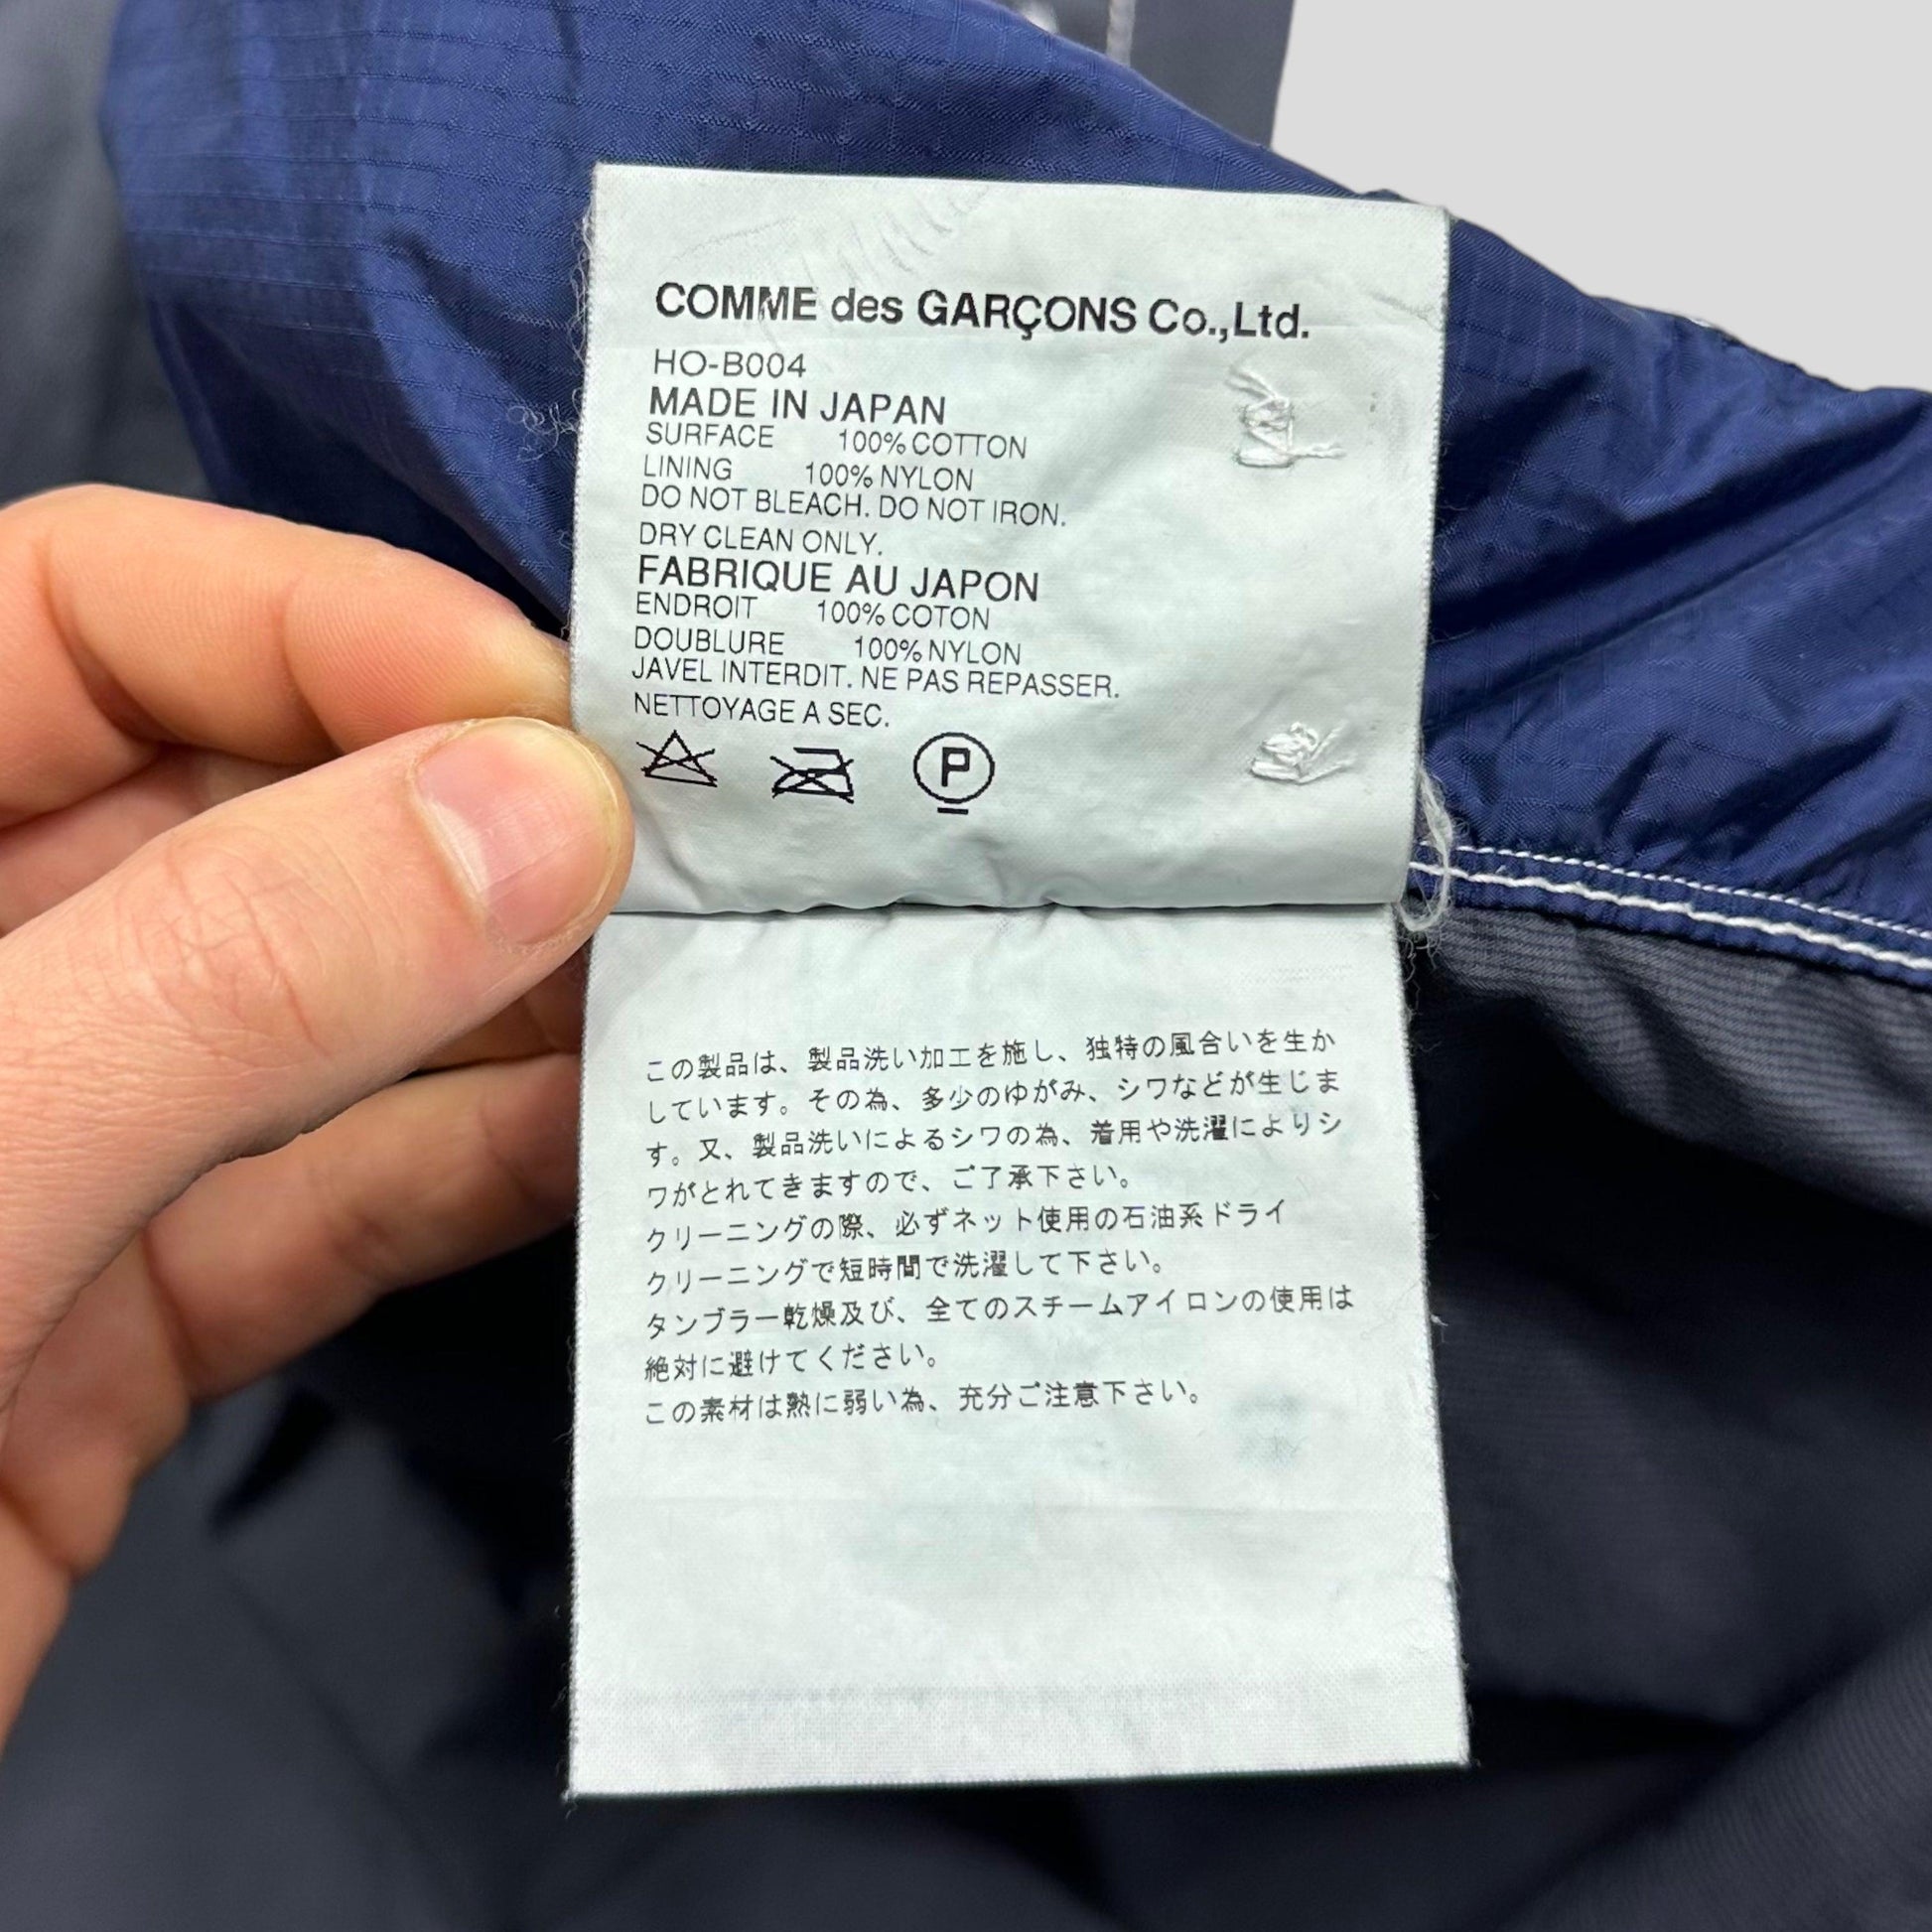 CDG Homme 2004 Windproof Cargo Shirt - M/L - Known Source